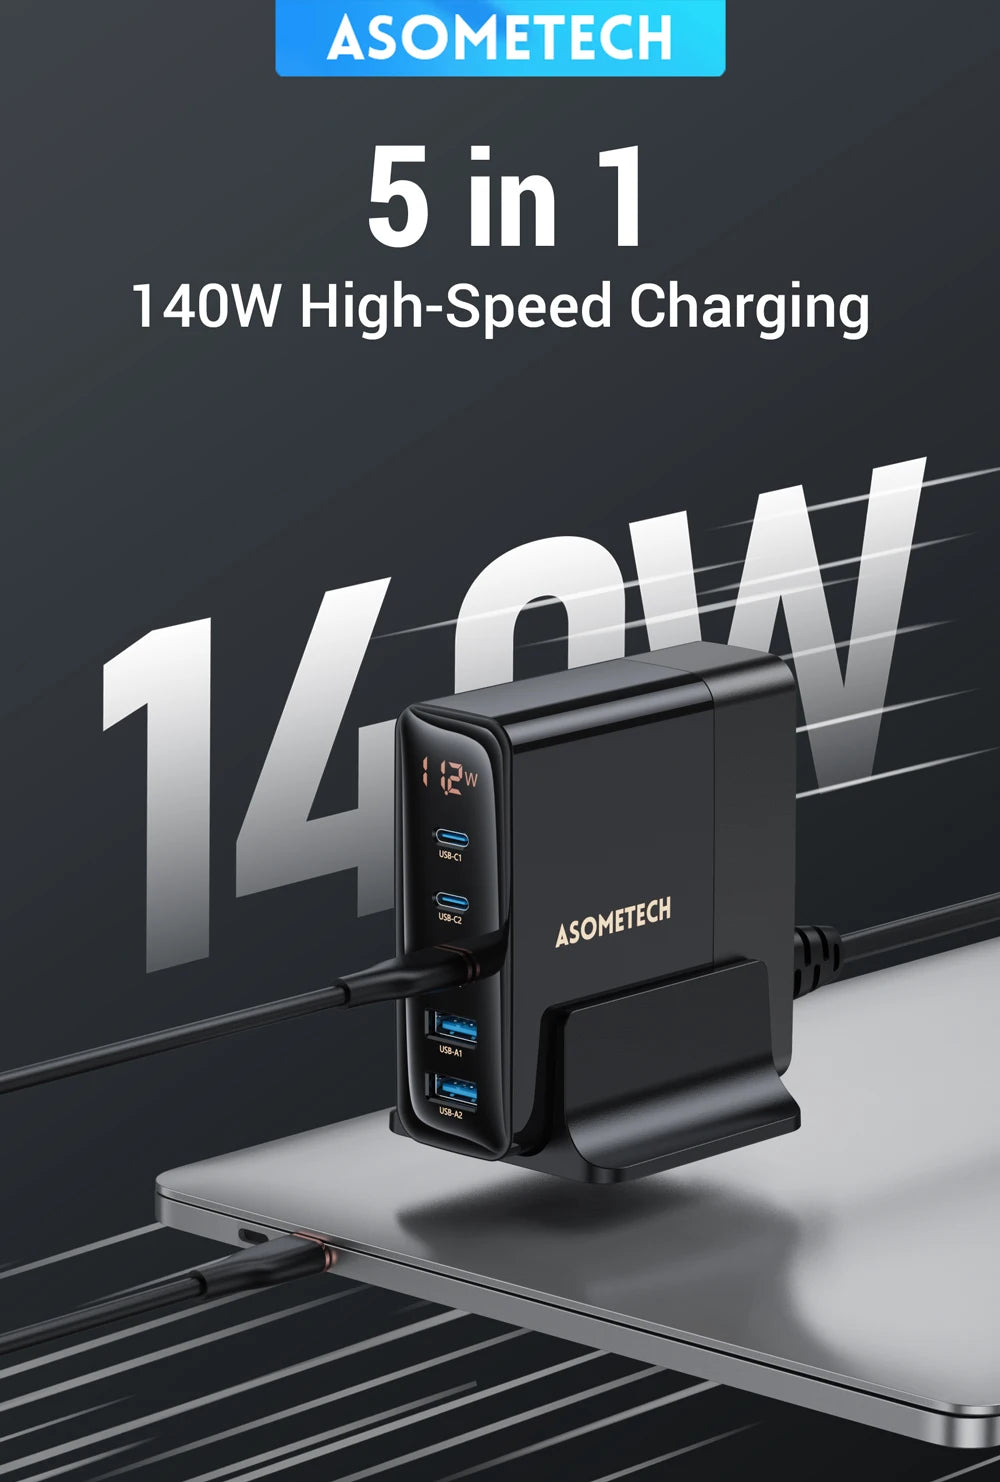 ASOMETECH 140W GaN Charger Desktop USB Charging Station 5 USB Ports PD 100W PPS USB Fast Charger For Macbook iPhone Samsung S22